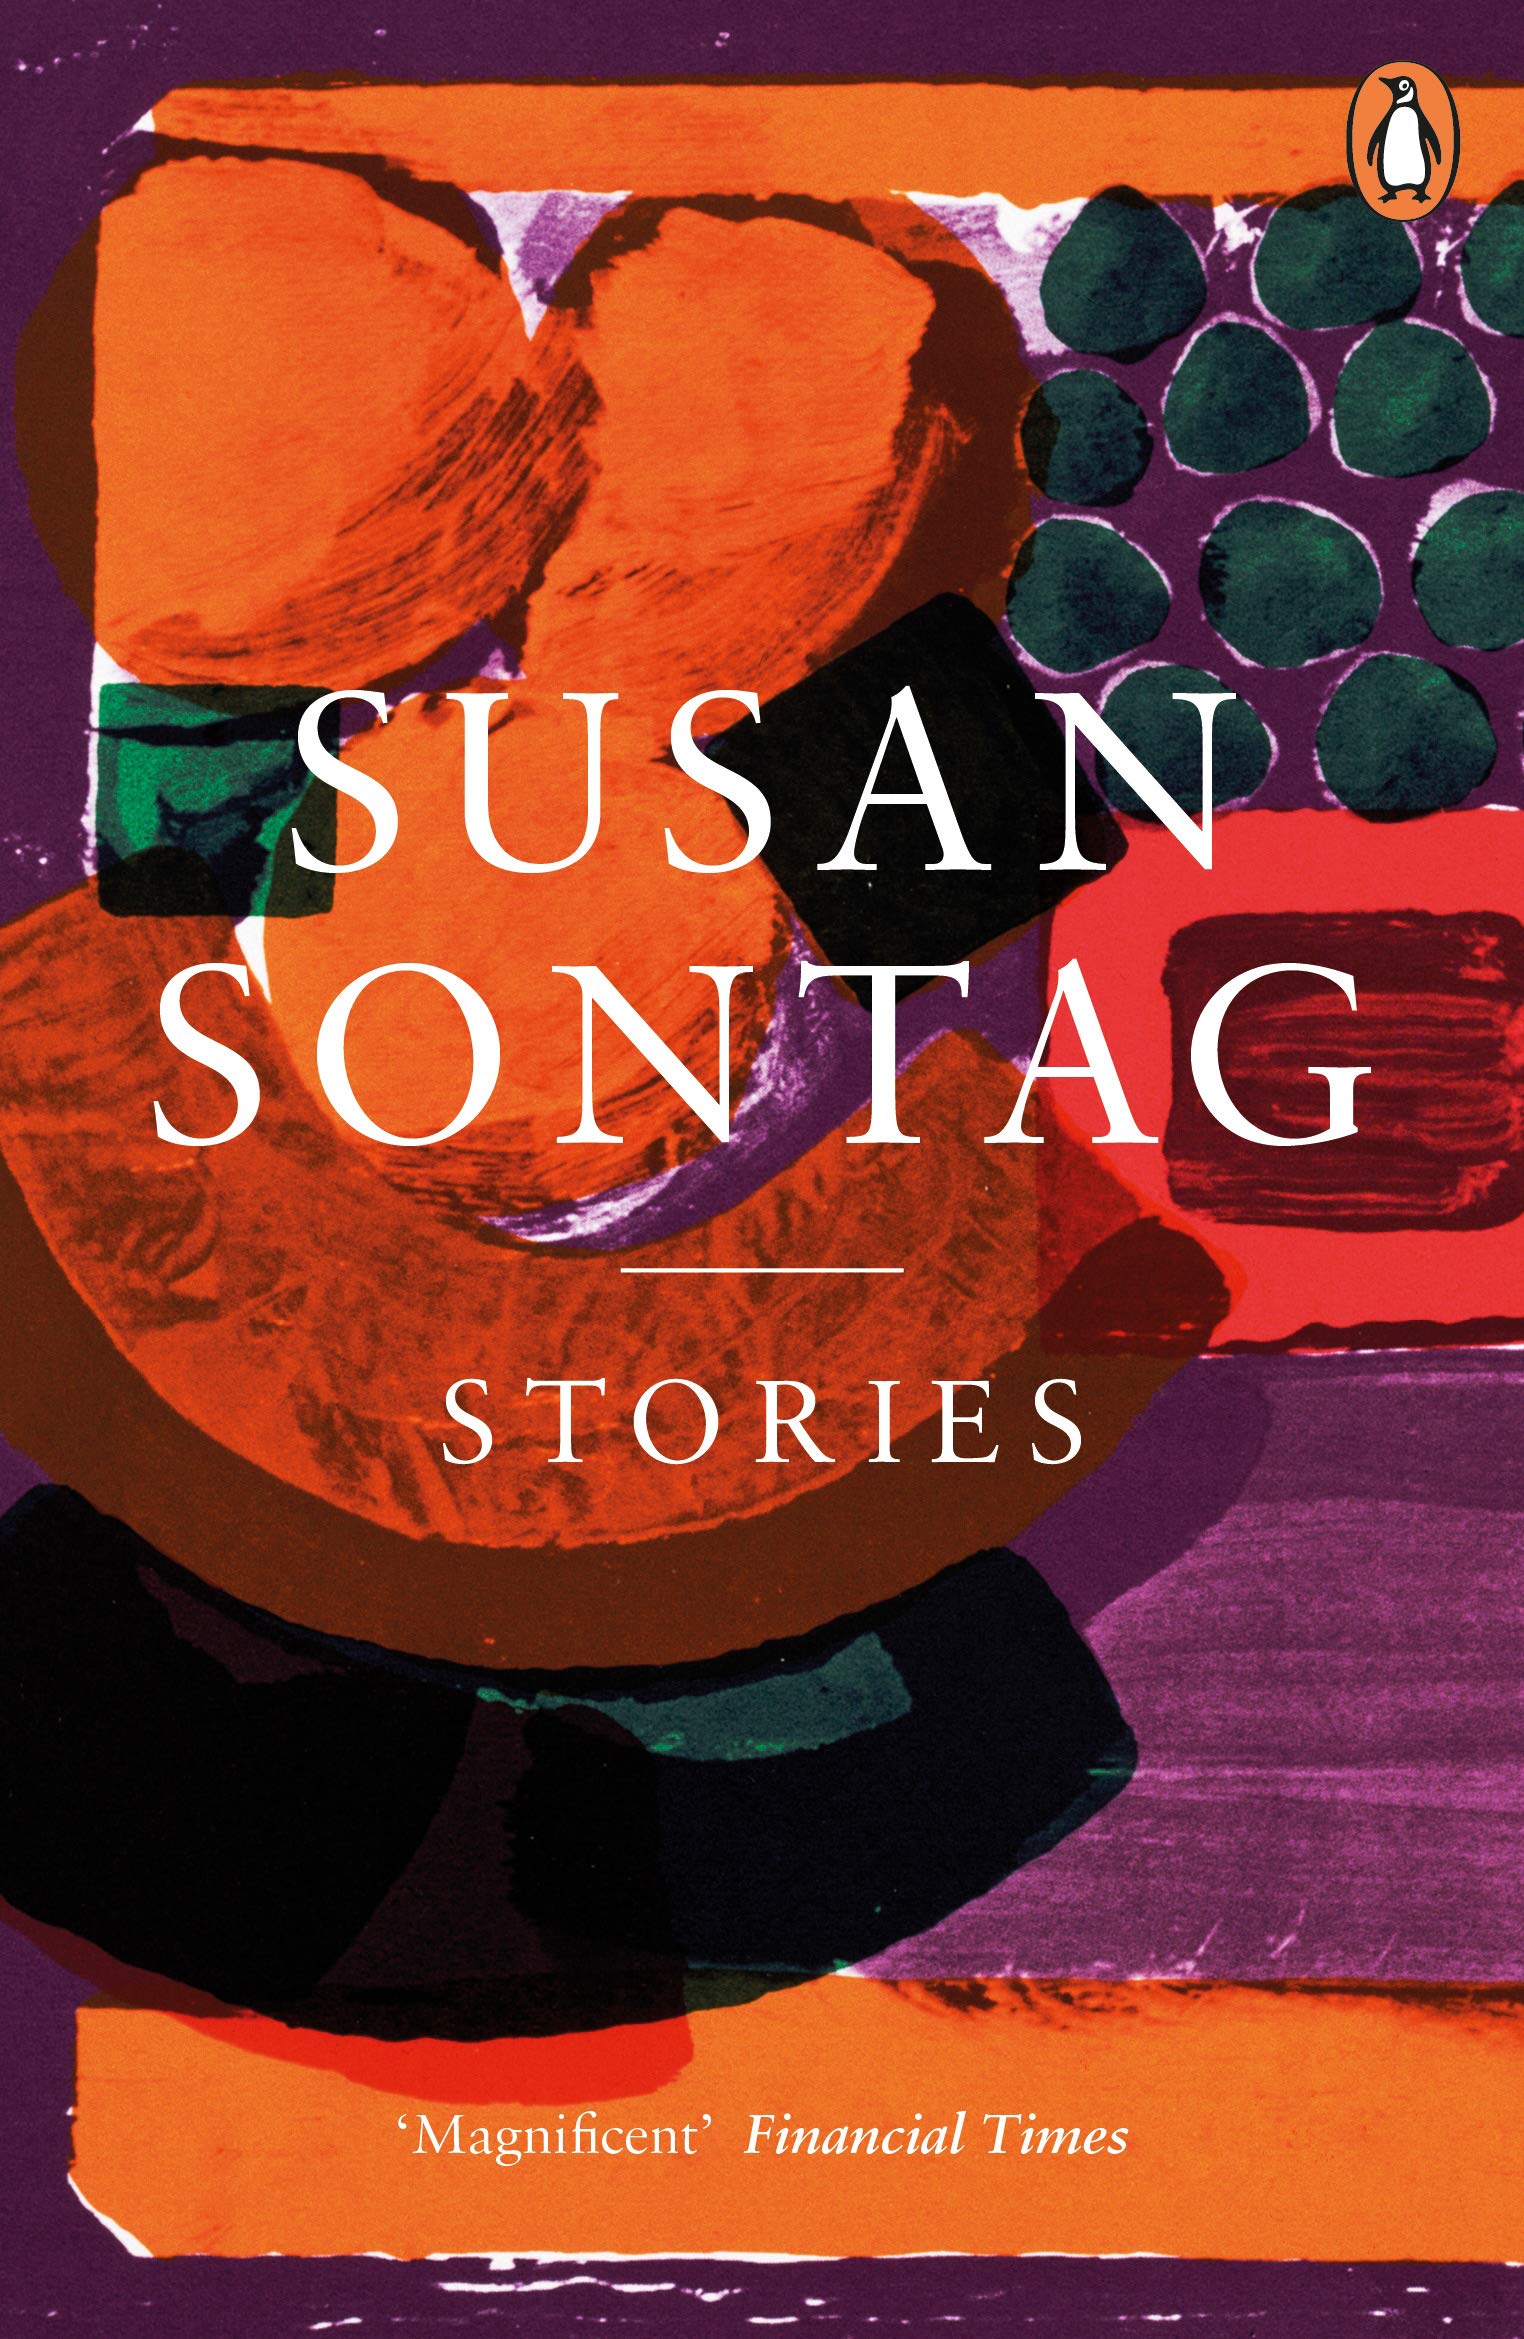 Stories: Collected Stories | Susan Sontag